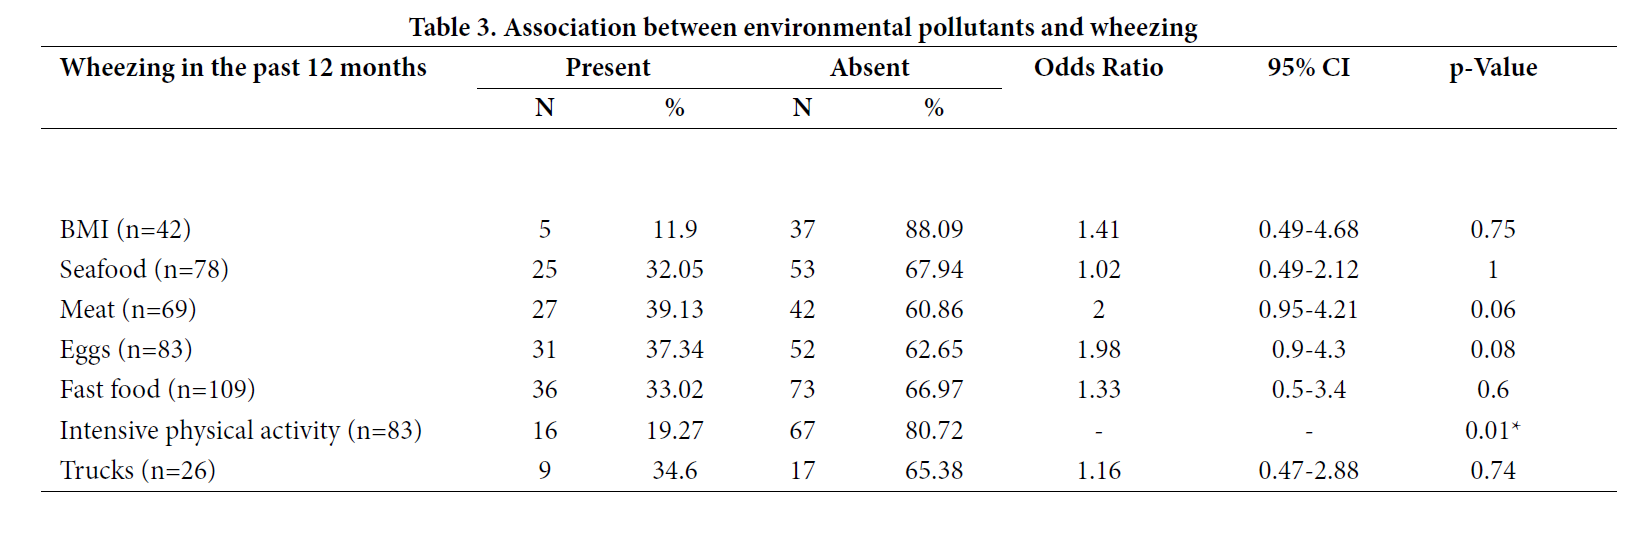 Prevalence and risk factors associated with wheezing among children and adolescents from Chennai, South India